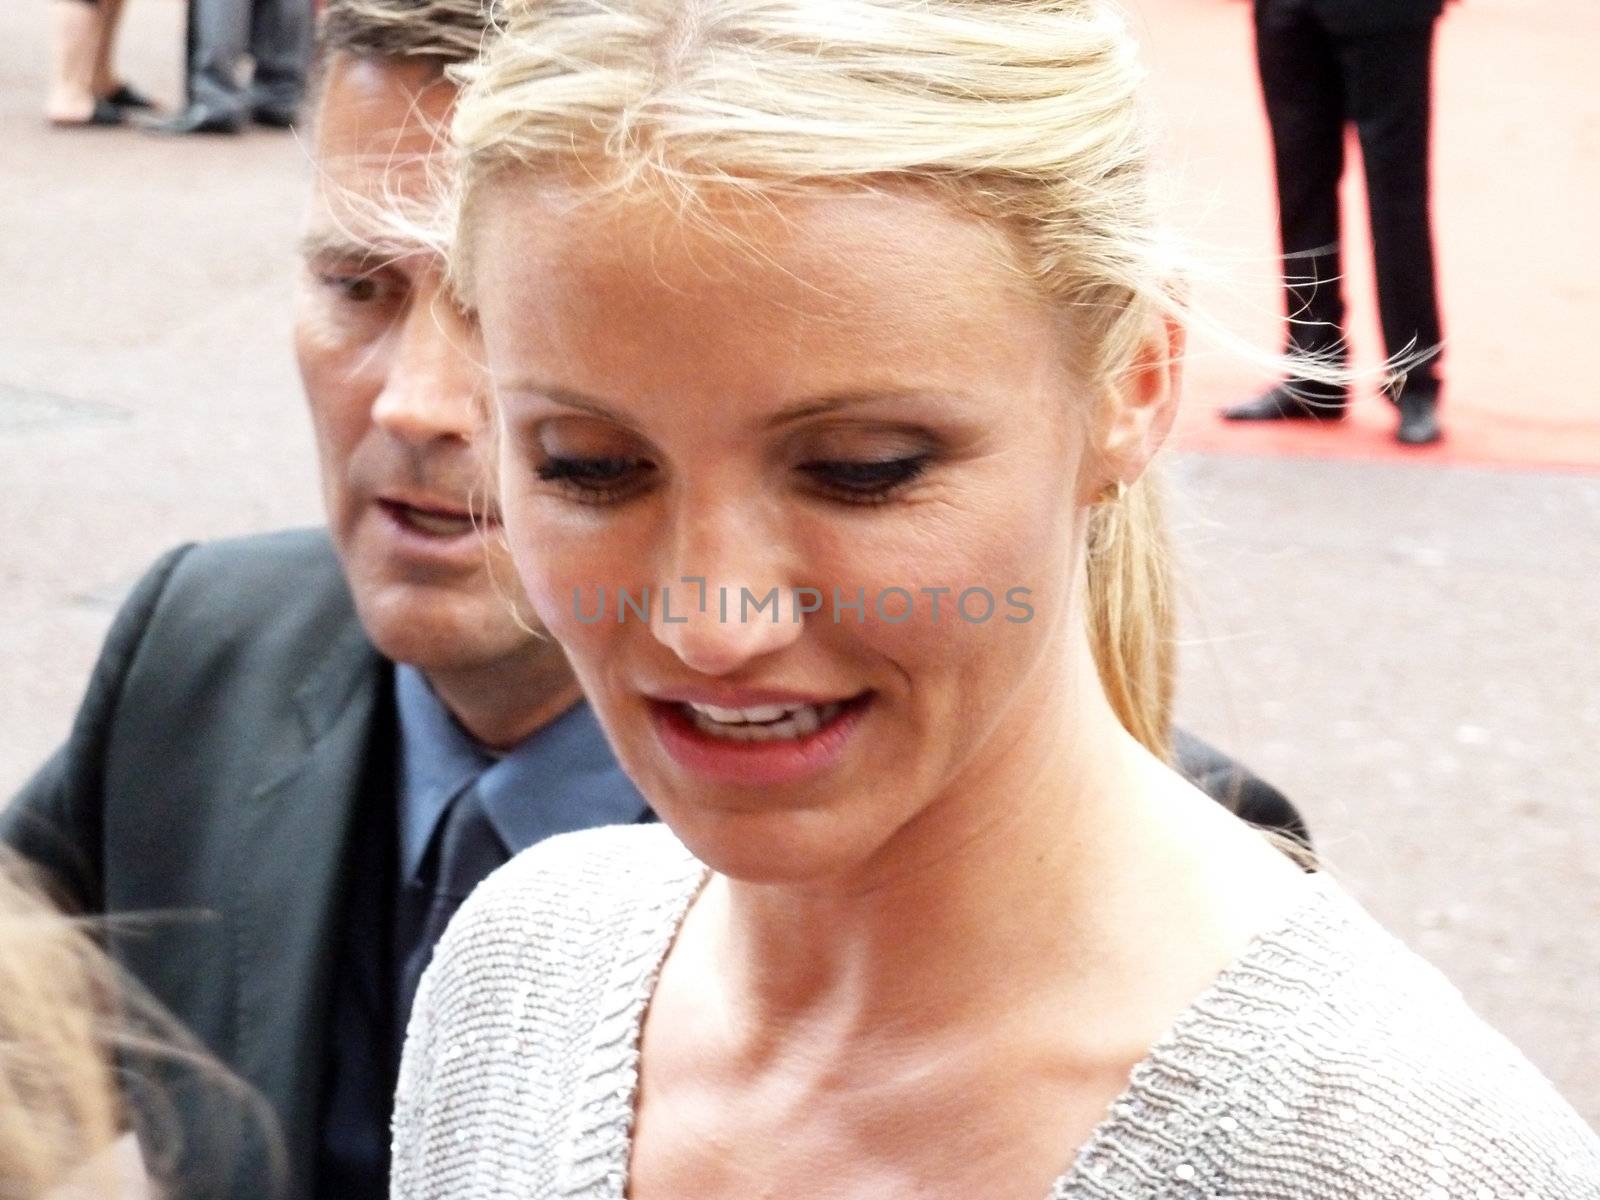 Cameron Diaz At Knight And Day Premiere by harveysart